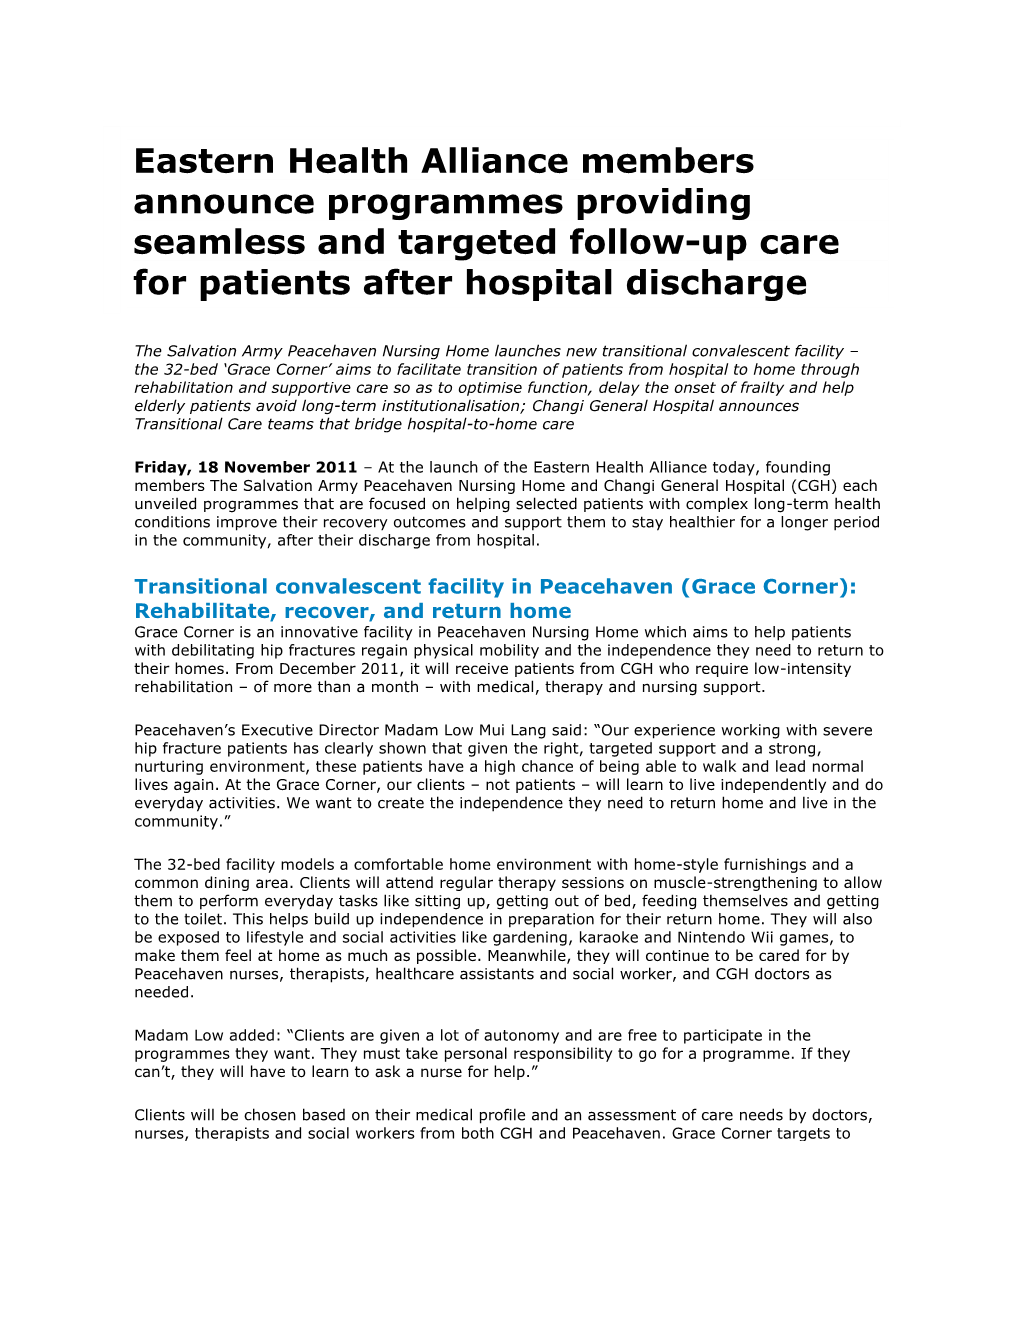 Eastern Health Alliance Members Announce Programmes Providing Seamless and Targeted Follow-Up Care for Patients After Hospital Discharge